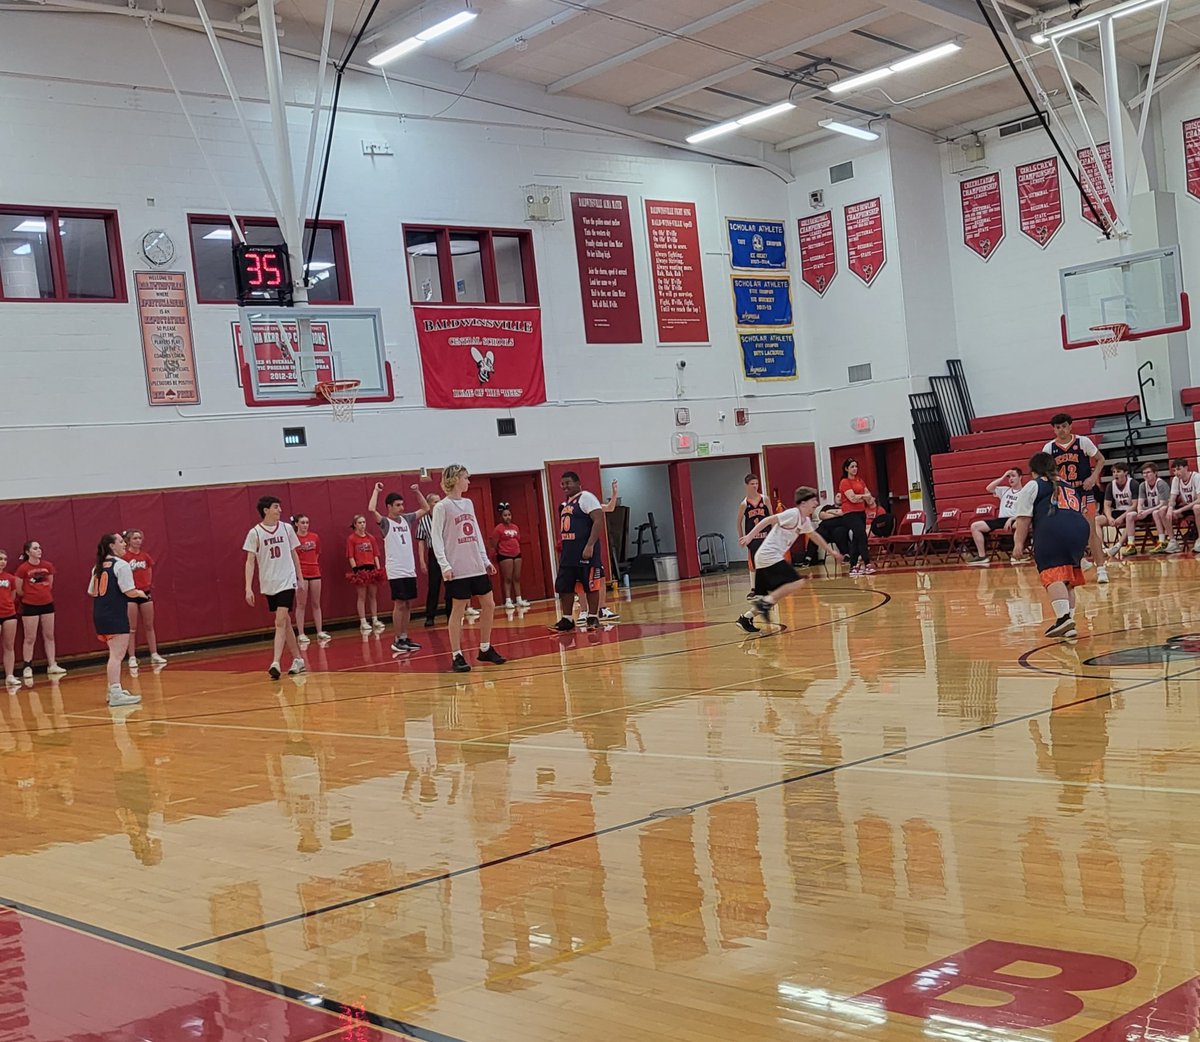 I have the privilege of announcing the Bees Unified Basketball games this season. If you have never seen these athletes in action, you're missing out. There are home games the next two Tuesdays, May 14th and 21st at 4 pm. Come on out and support these outstanding athletes.